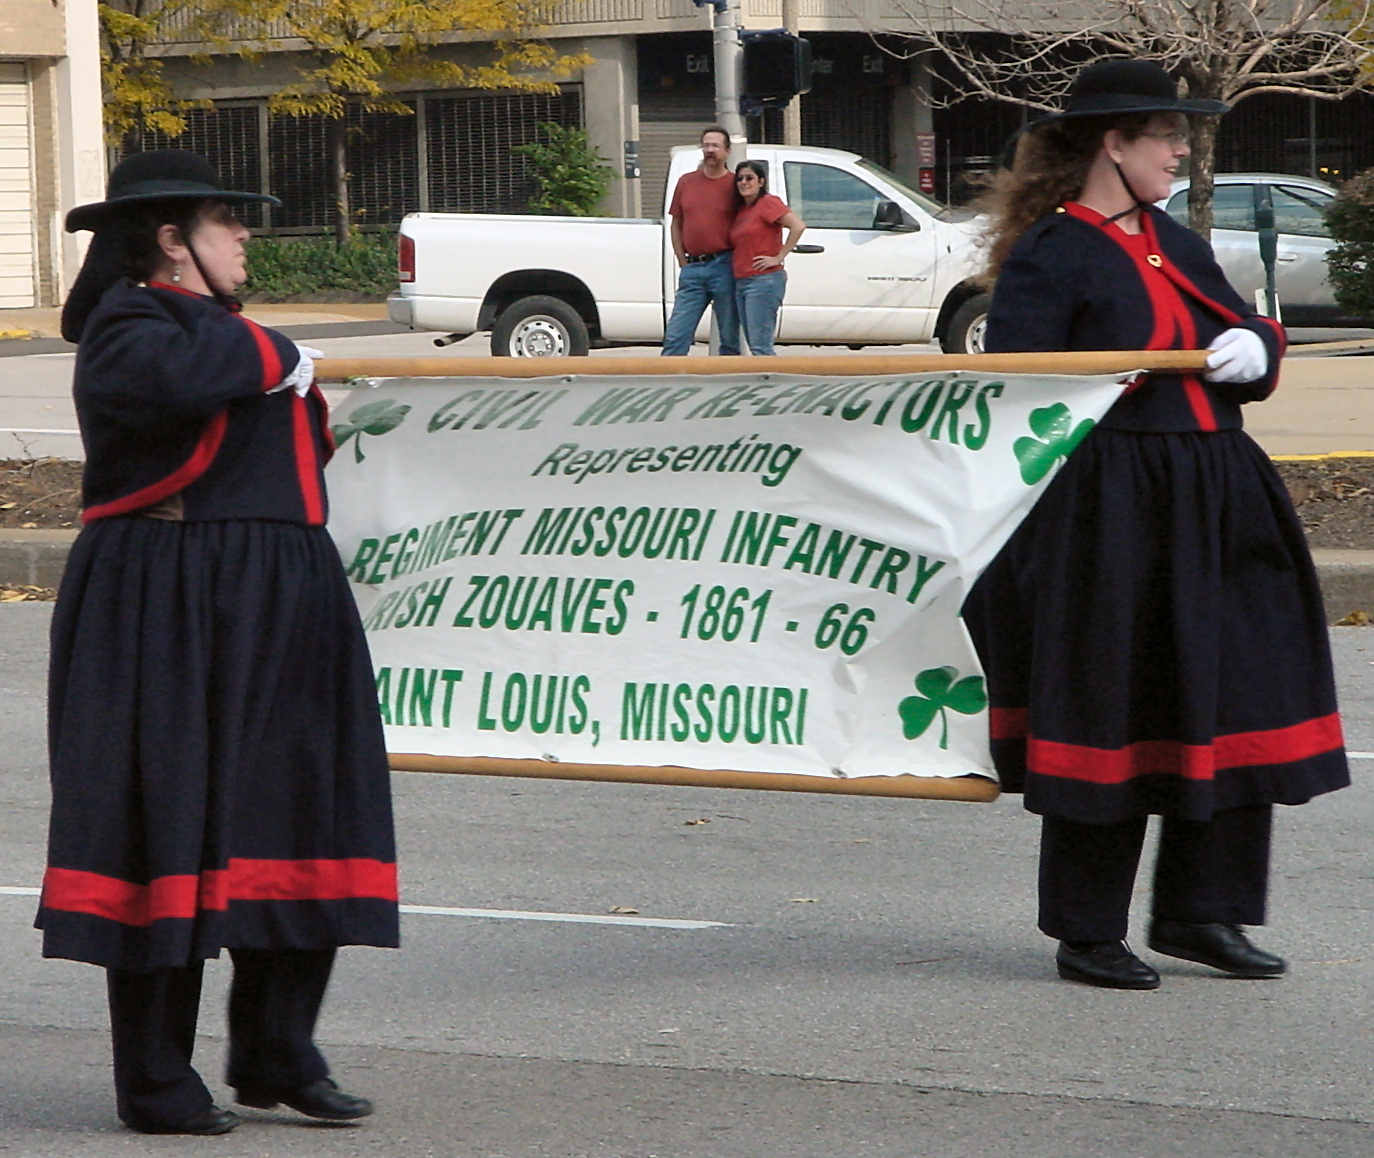 Women carrying banner in parade